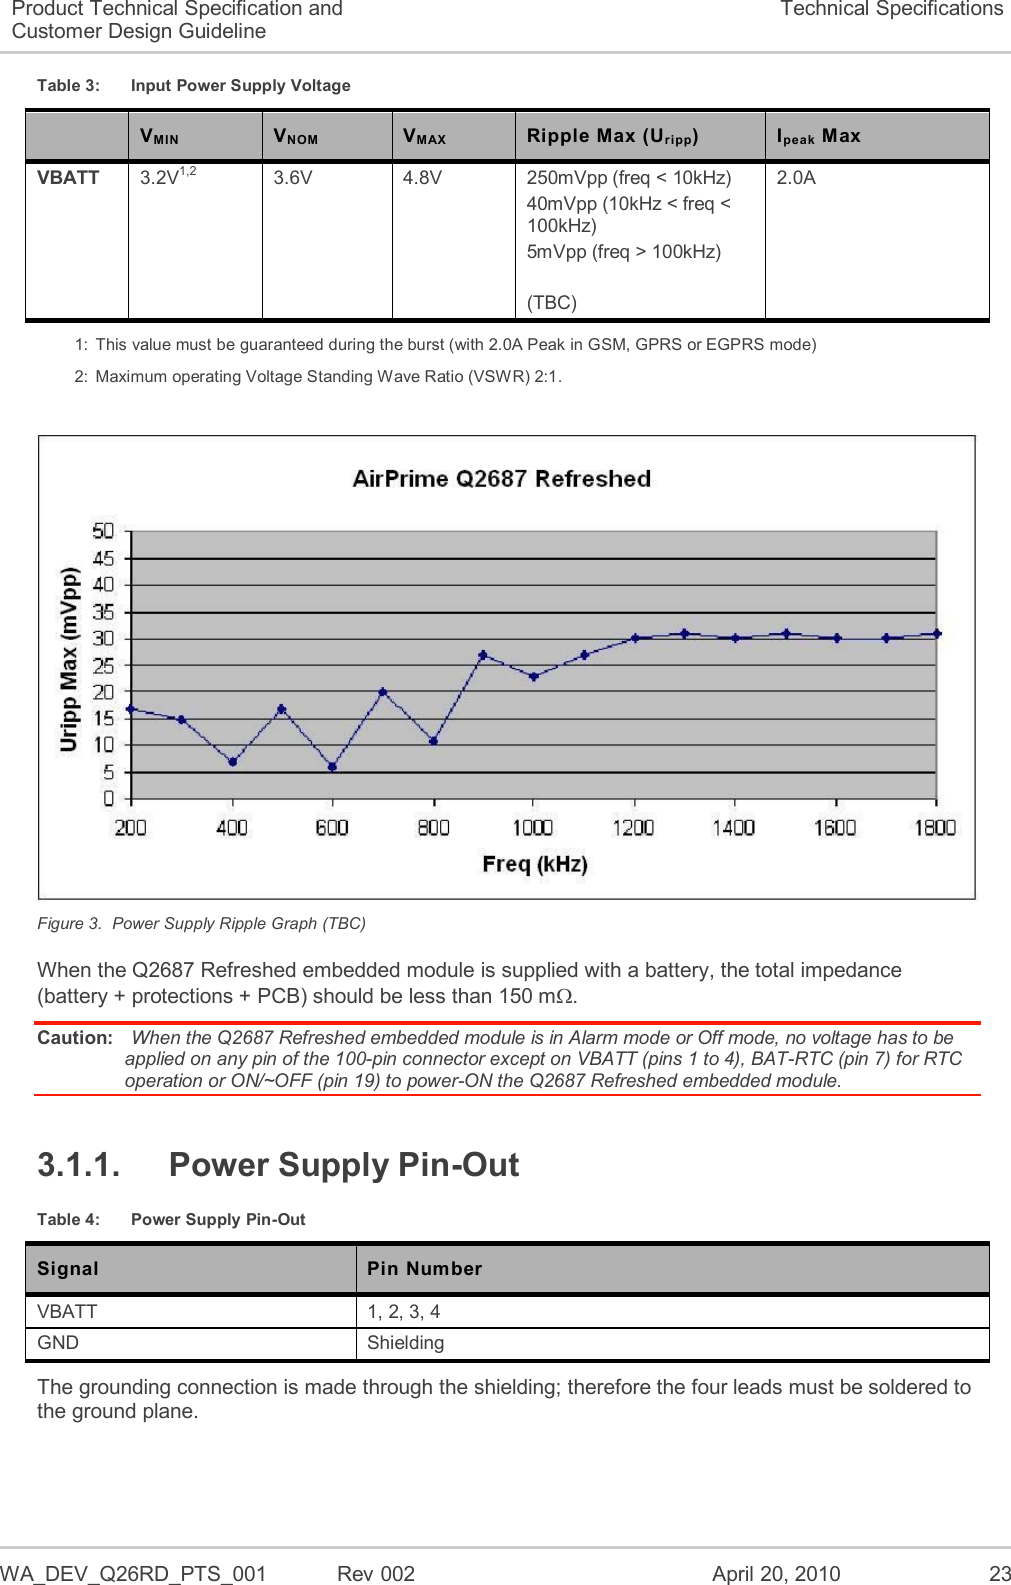  WA_DEV_Q26RD_PTS_001  Rev 002  April 20, 2010 23 Product Technical Specification and Customer Design Guideline Technical Specifications Table 3:  Input Power Supply Voltage  VMIN VNO M  VMAX  Ripple Max (Uripp) Ipeak  Max VBATT 3.2V1,2 3.6V 4.8V 250mVpp (freq &lt; 10kHz) 40mVpp (10kHz &lt; freq &lt; 100kHz) 5mVpp (freq &gt; 100kHz)  (TBC) 2.0A 1:  This value must be guaranteed during the burst (with 2.0A Peak in GSM, GPRS or EGPRS mode) 2:  Maximum operating Voltage Standing Wave Ratio (VSWR) 2:1.   Figure 3.  Power Supply Ripple Graph (TBC) When the Q2687 Refreshed embedded module is supplied with a battery, the total impedance (battery + protections + PCB) should be less than 150 m. Caution:  When the Q2687 Refreshed embedded module is in Alarm mode or Off mode, no voltage has to be applied on any pin of the 100-pin connector except on VBATT (pins 1 to 4), BAT-RTC (pin 7) for RTC operation or ON/~OFF (pin 19) to power-ON the Q2687 Refreshed embedded module. 3.1.1.  Power Supply Pin-Out Table 4:  Power Supply Pin-Out Signal Pin Number VBATT 1, 2, 3, 4 GND Shielding The grounding connection is made through the shielding; therefore the four leads must be soldered to the ground plane. 